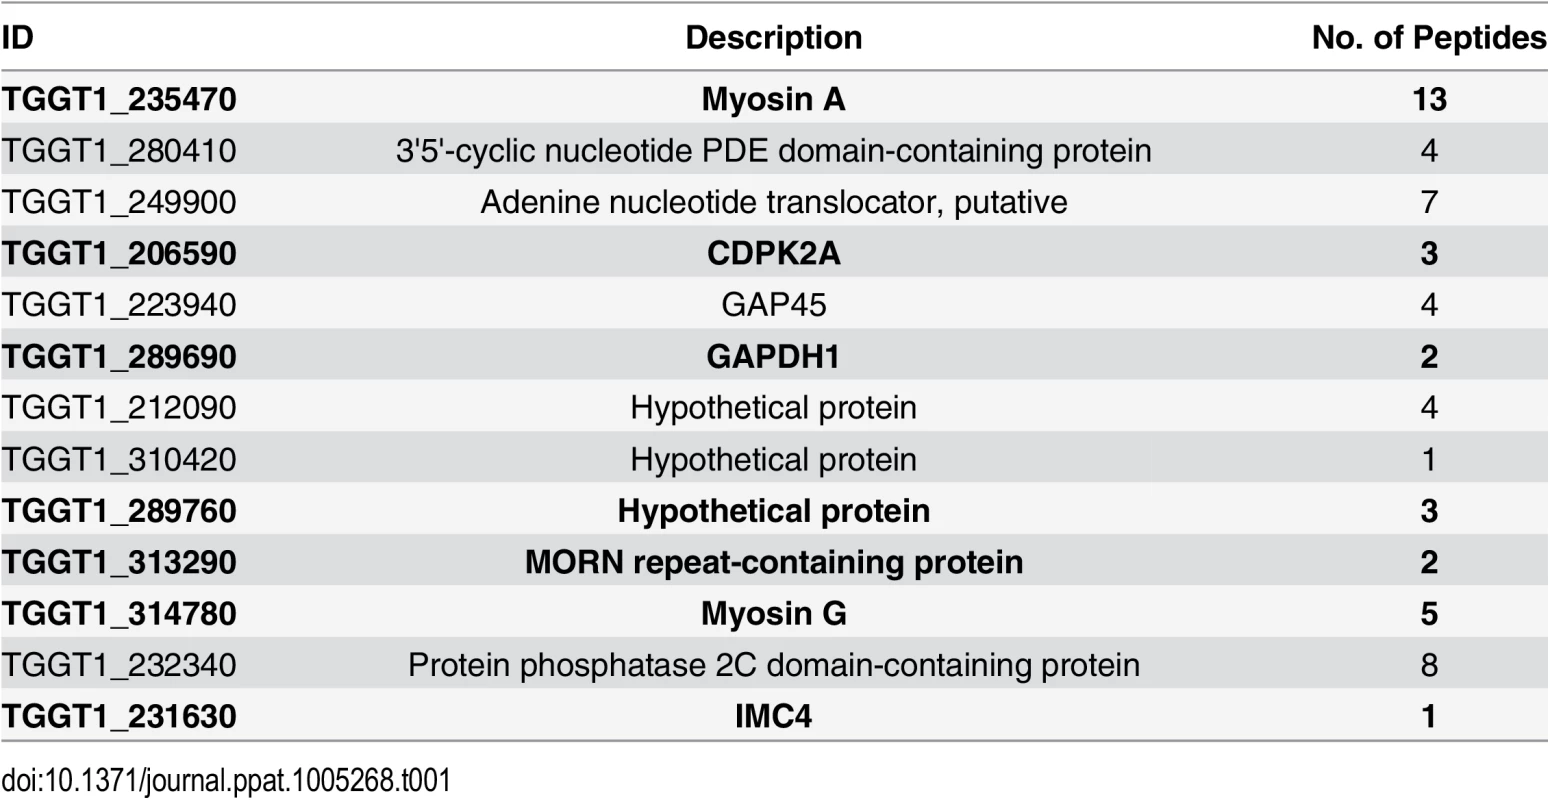 Proteins uniquely biotinylated in BirA* fusion protein expressing parasites.